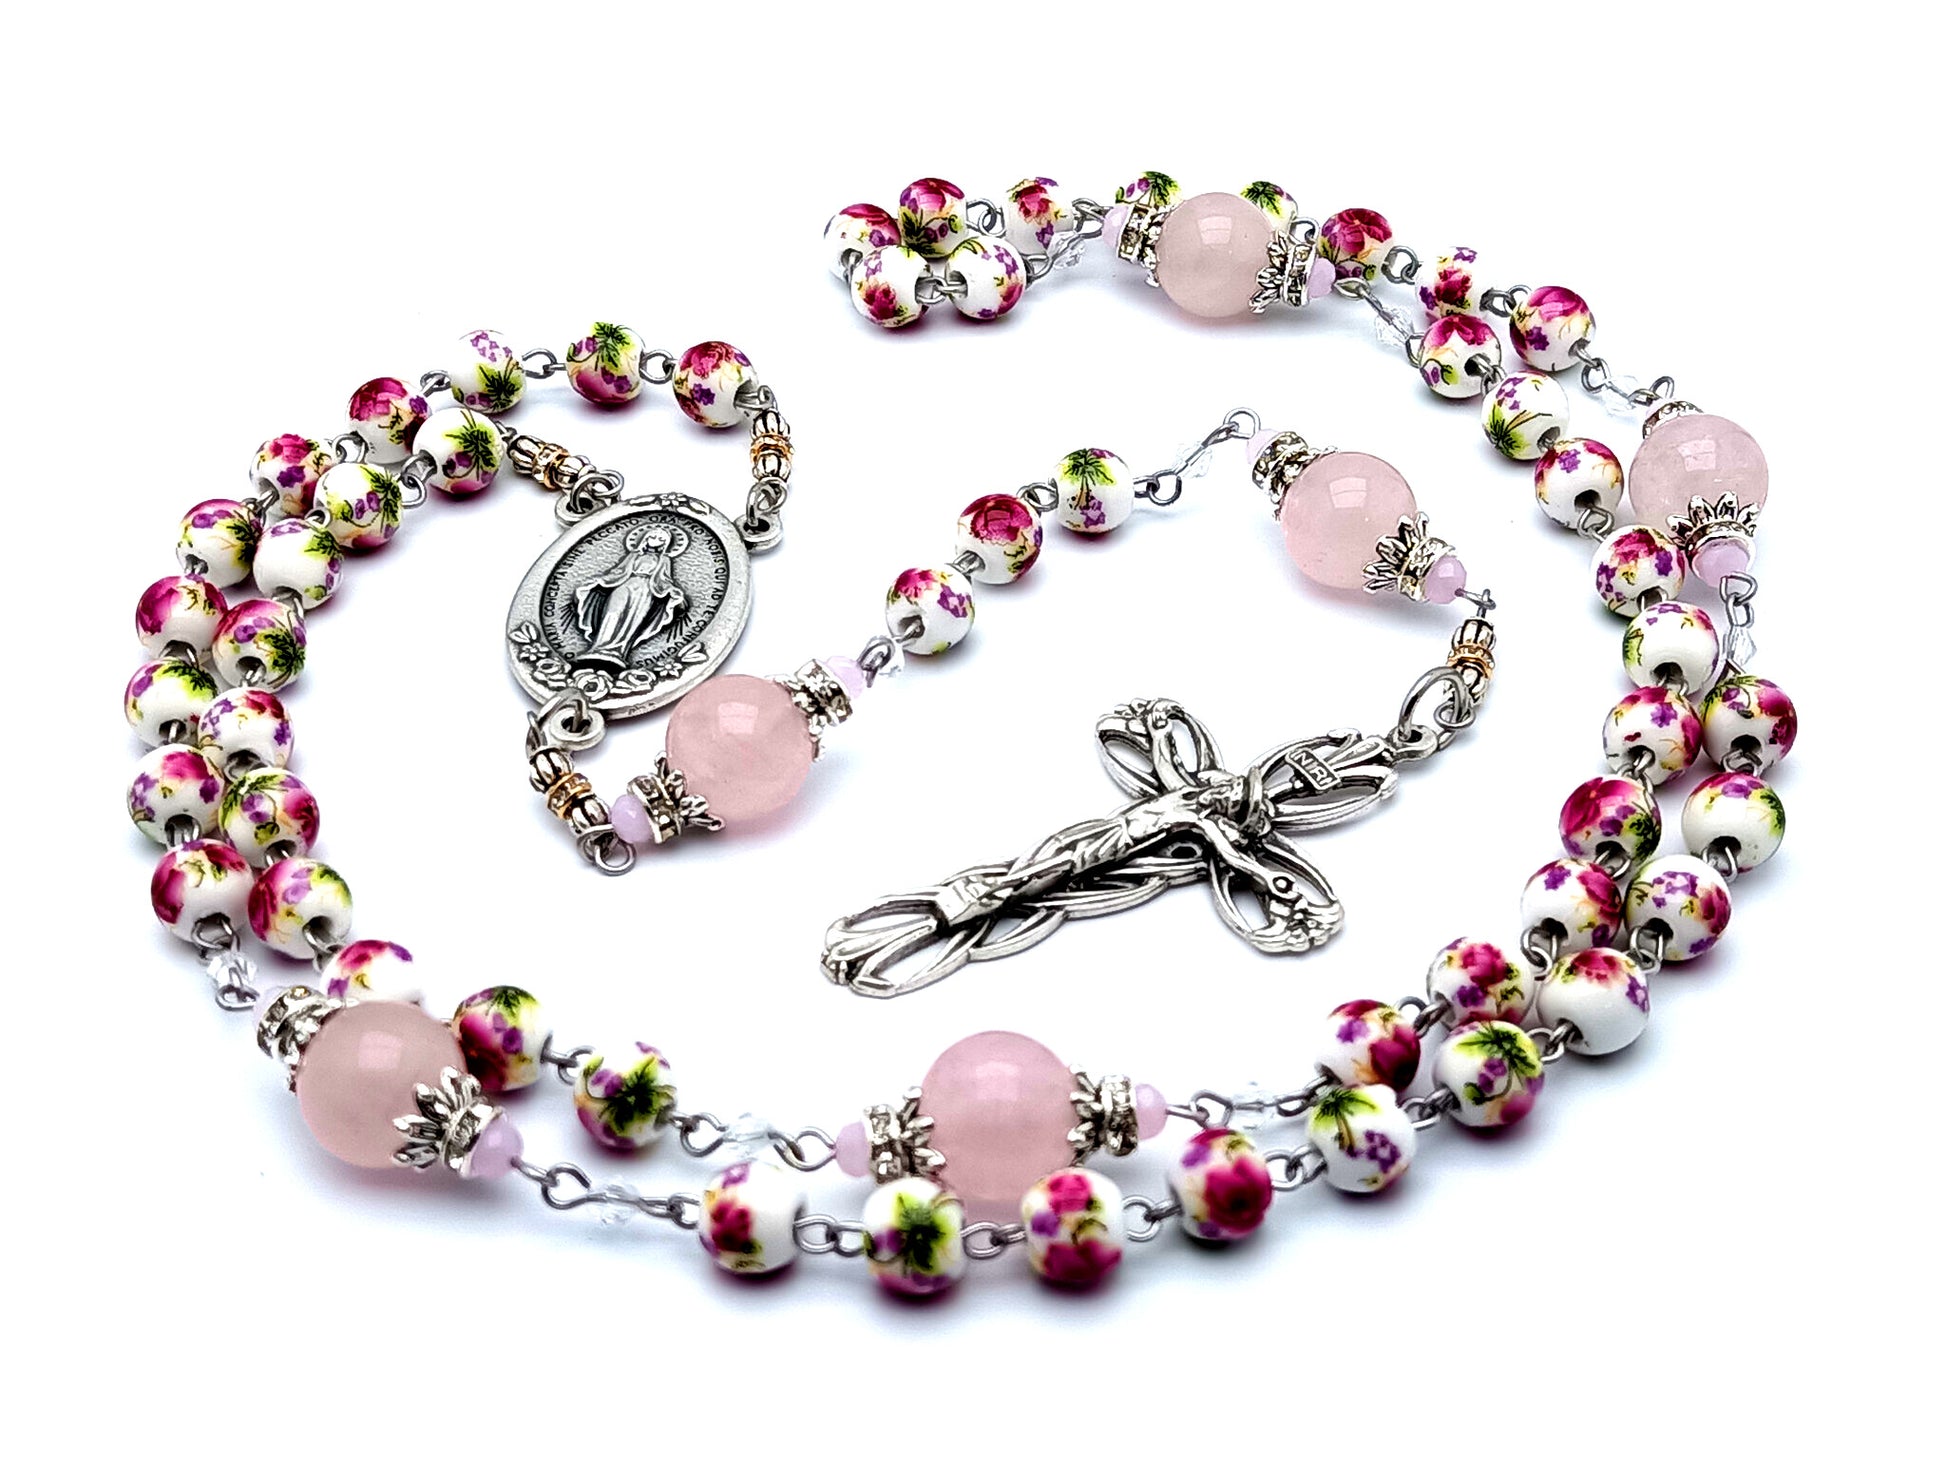 Miraculous medal floral porcelain rosary beads with rose quartz gemsto –  Unique Rosary Beads